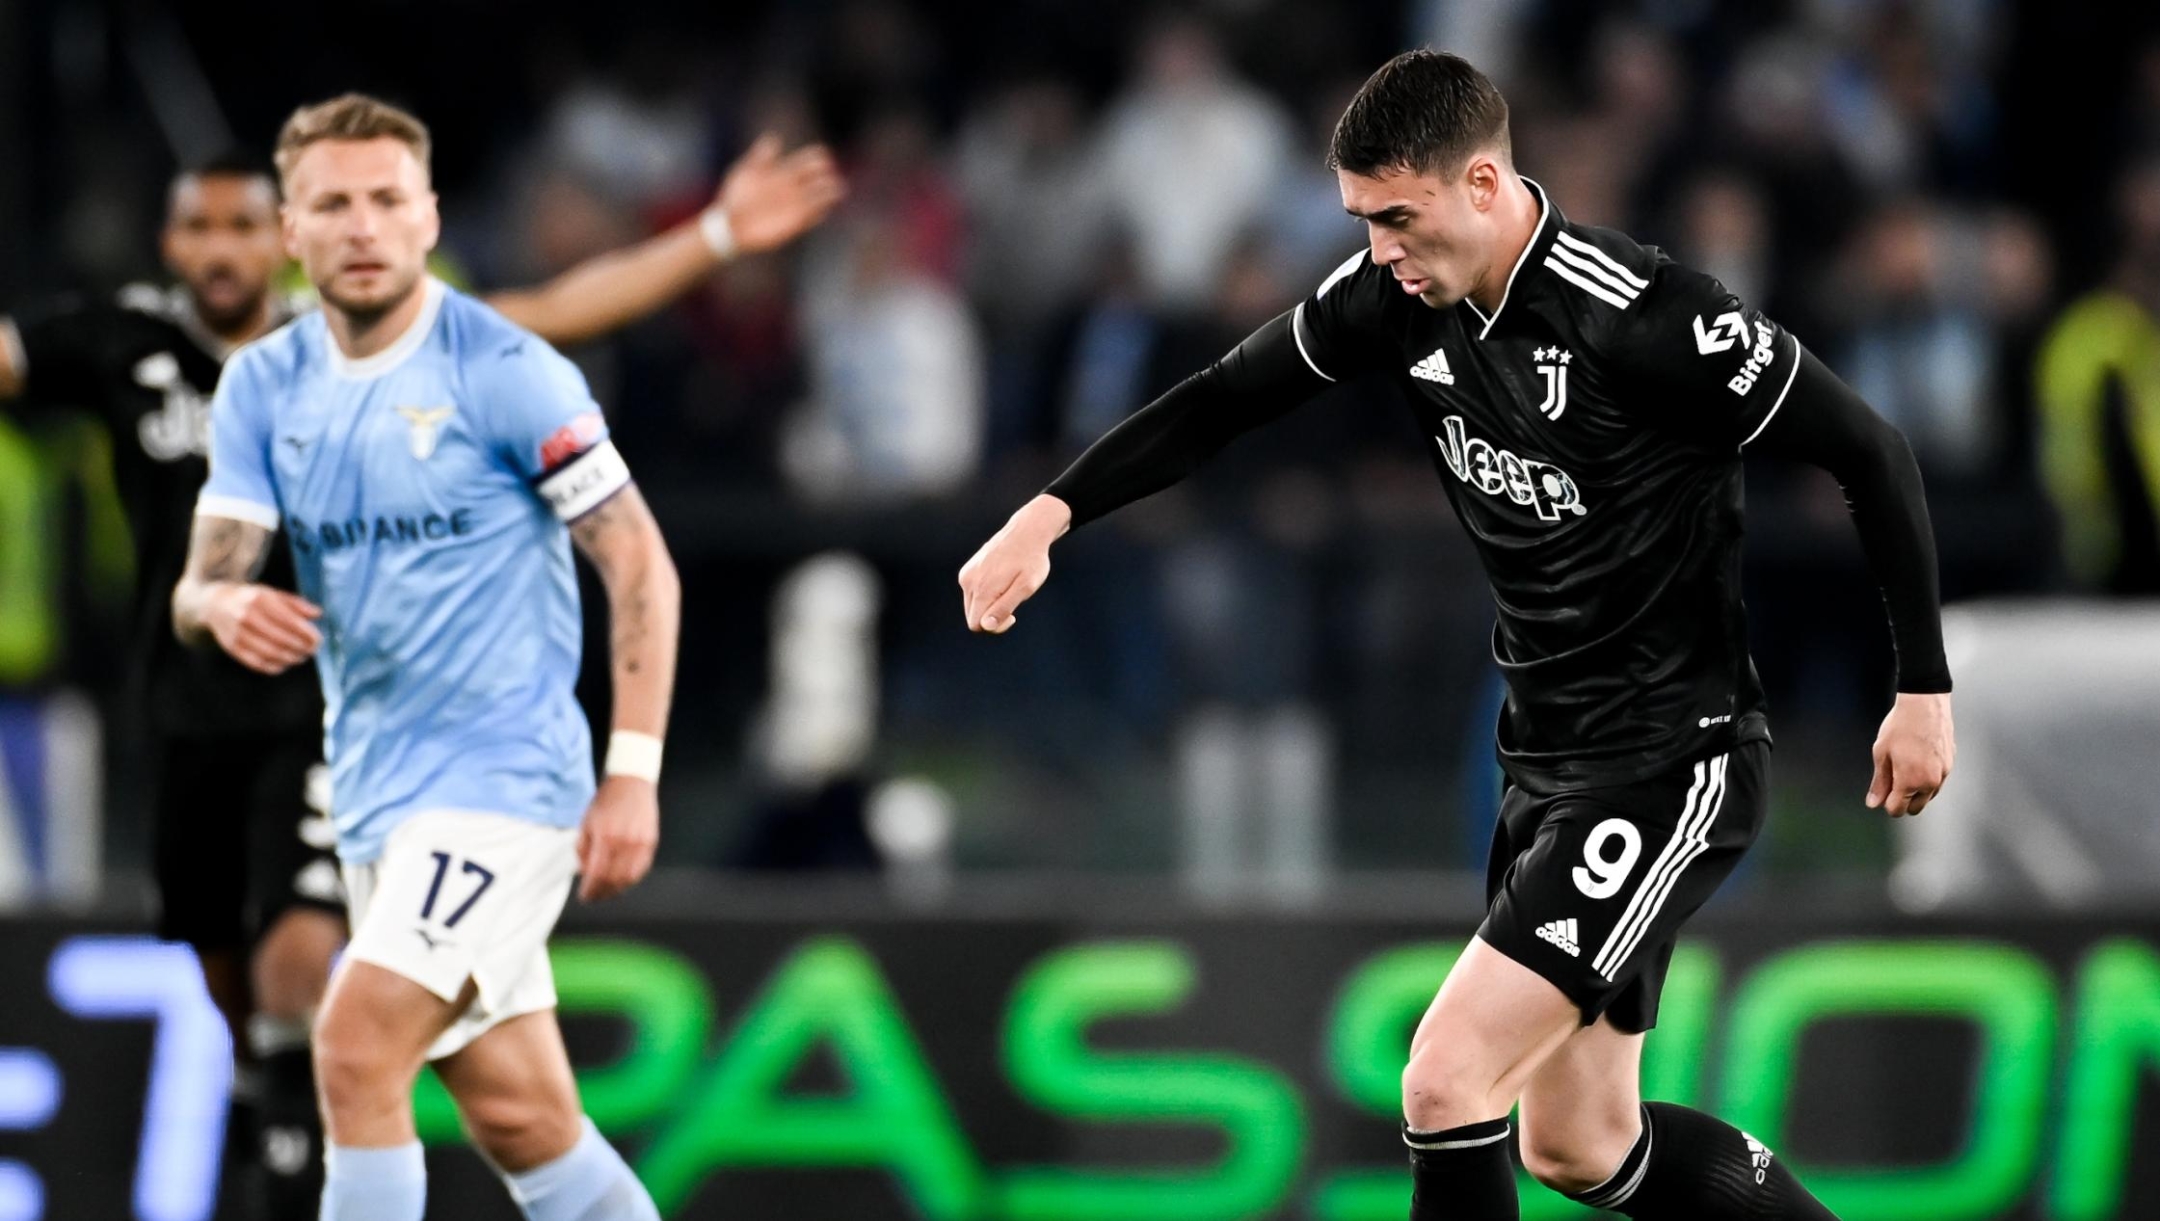 ROME, ITALY - APRIL 08: Dusan Vlahovic of Juventus runs with the ball during the Serie A match between SS Lazio and Juventus at Stadio Olimpico on April 08, 2023 in Rome, Italy. (Photo by Daniele Badolato - Juventus FC/Juventus FC via Getty Images)